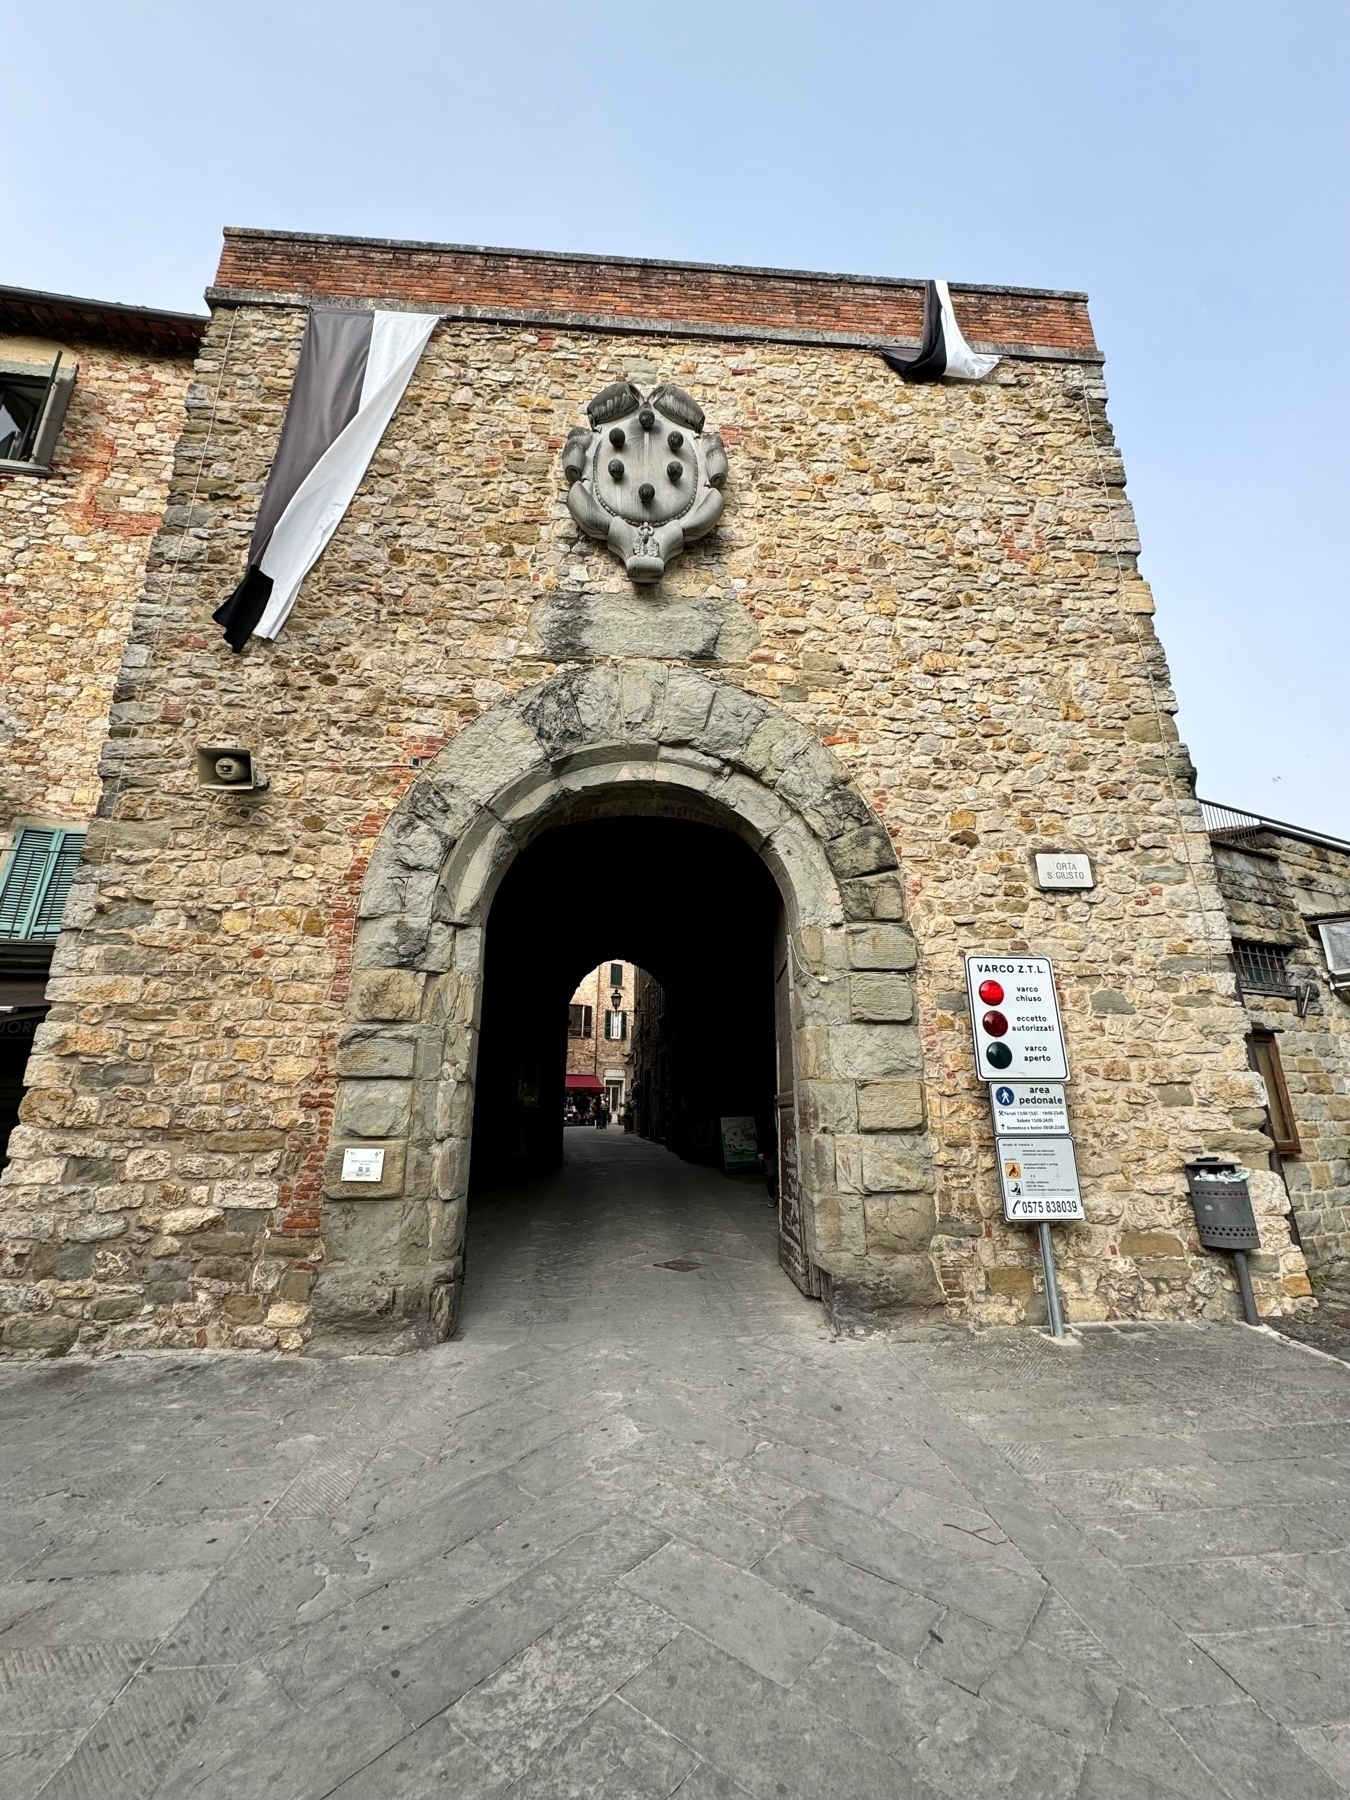 A historical stone archway with a medieval crest above it, situated in a rustic town. Black, white, and grey flags are draped over the wall.